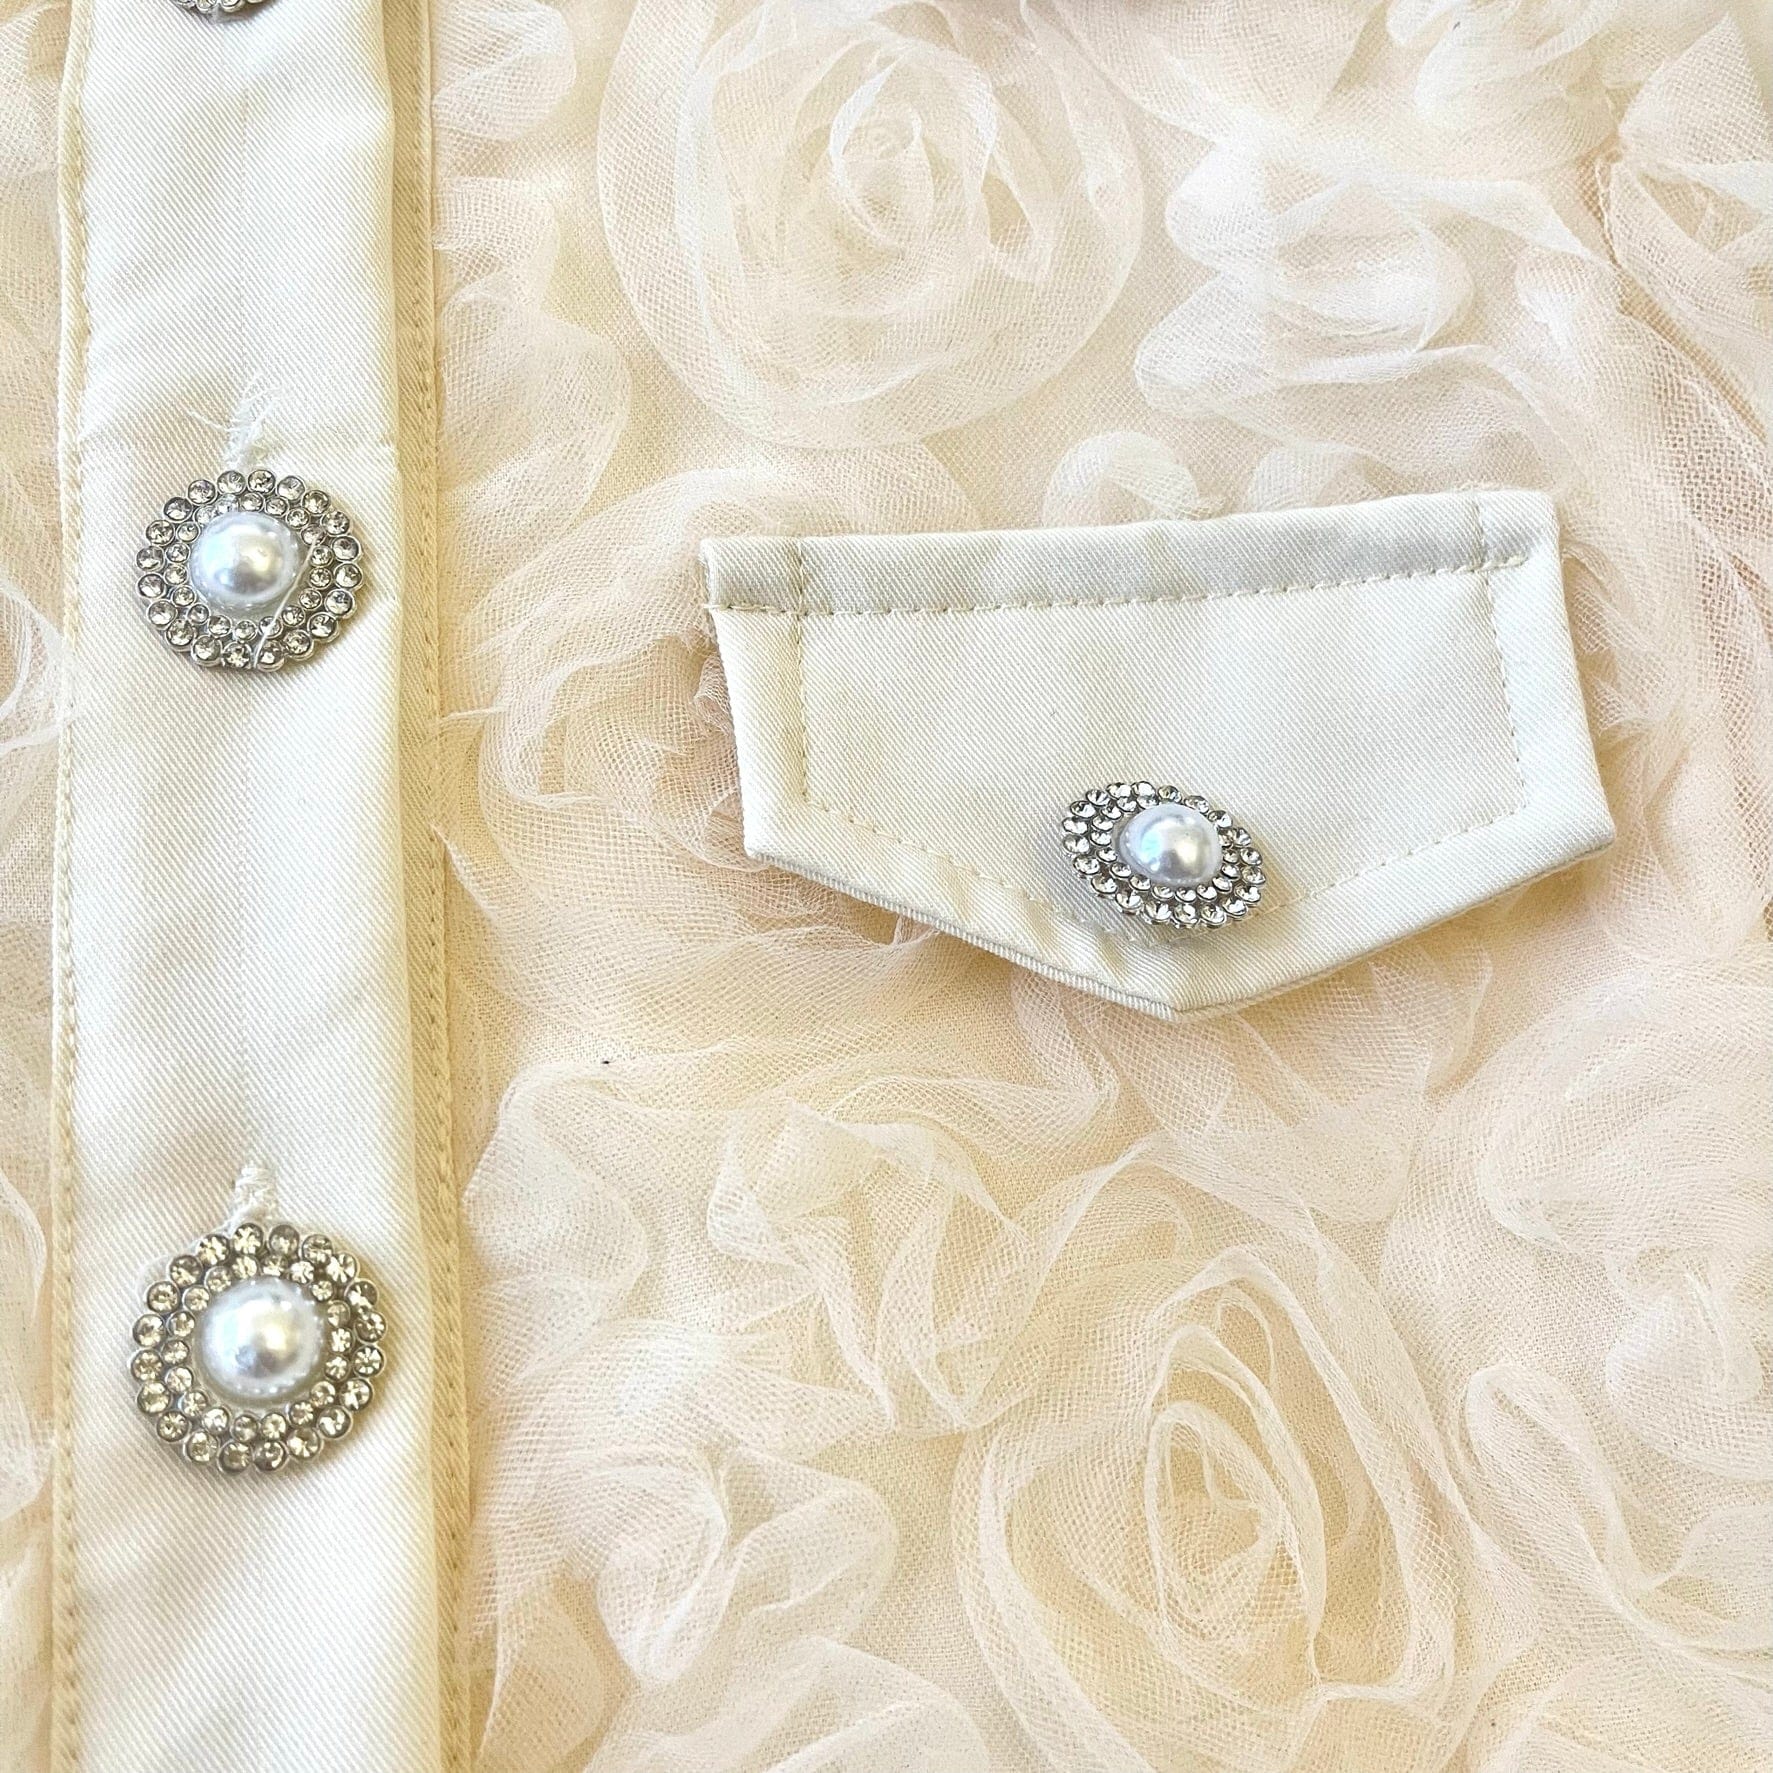 Details of the jacket from the Posh Tomboy Brunch at Tiffany's Organza Rose Skirt Set